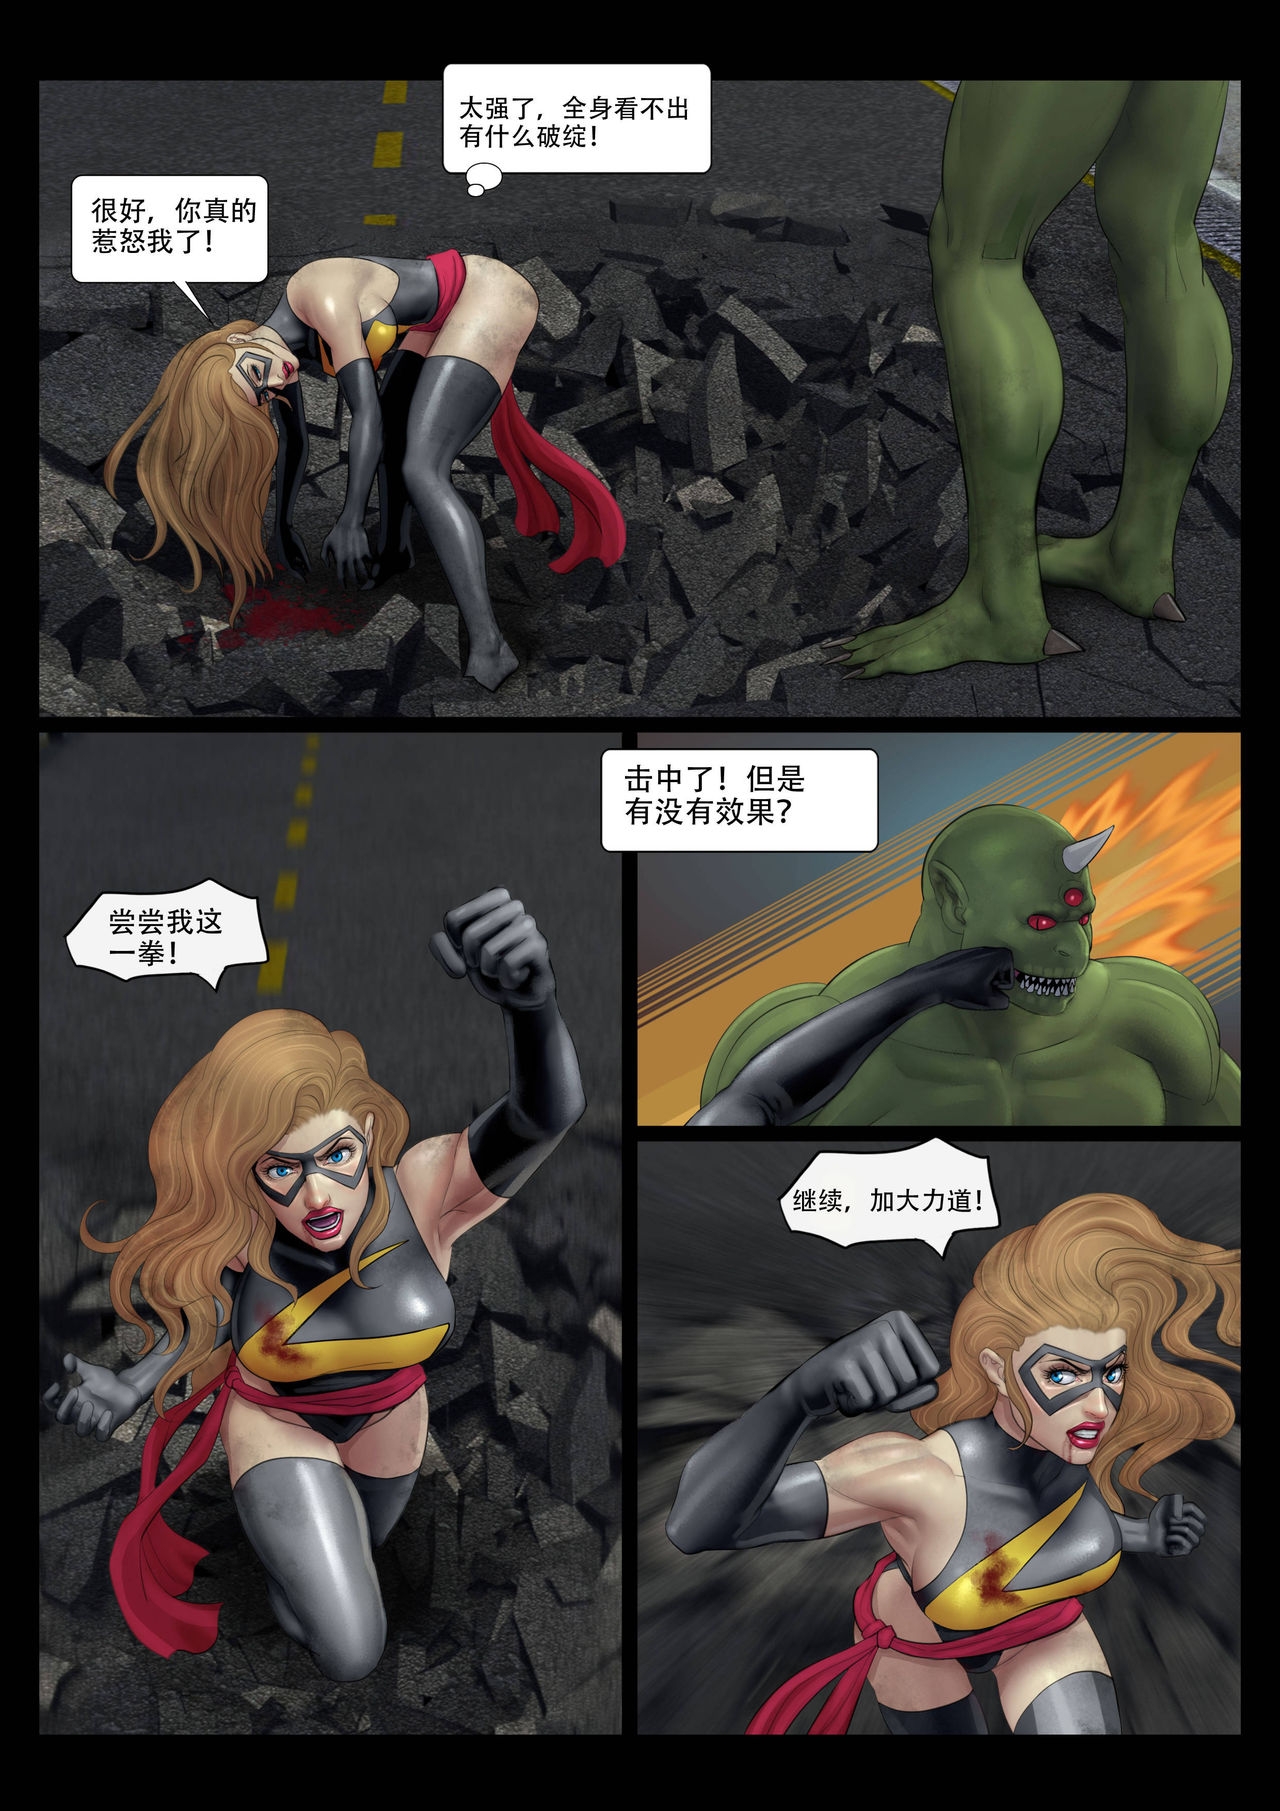 The Nightmare of Avengers Chapter 0 11